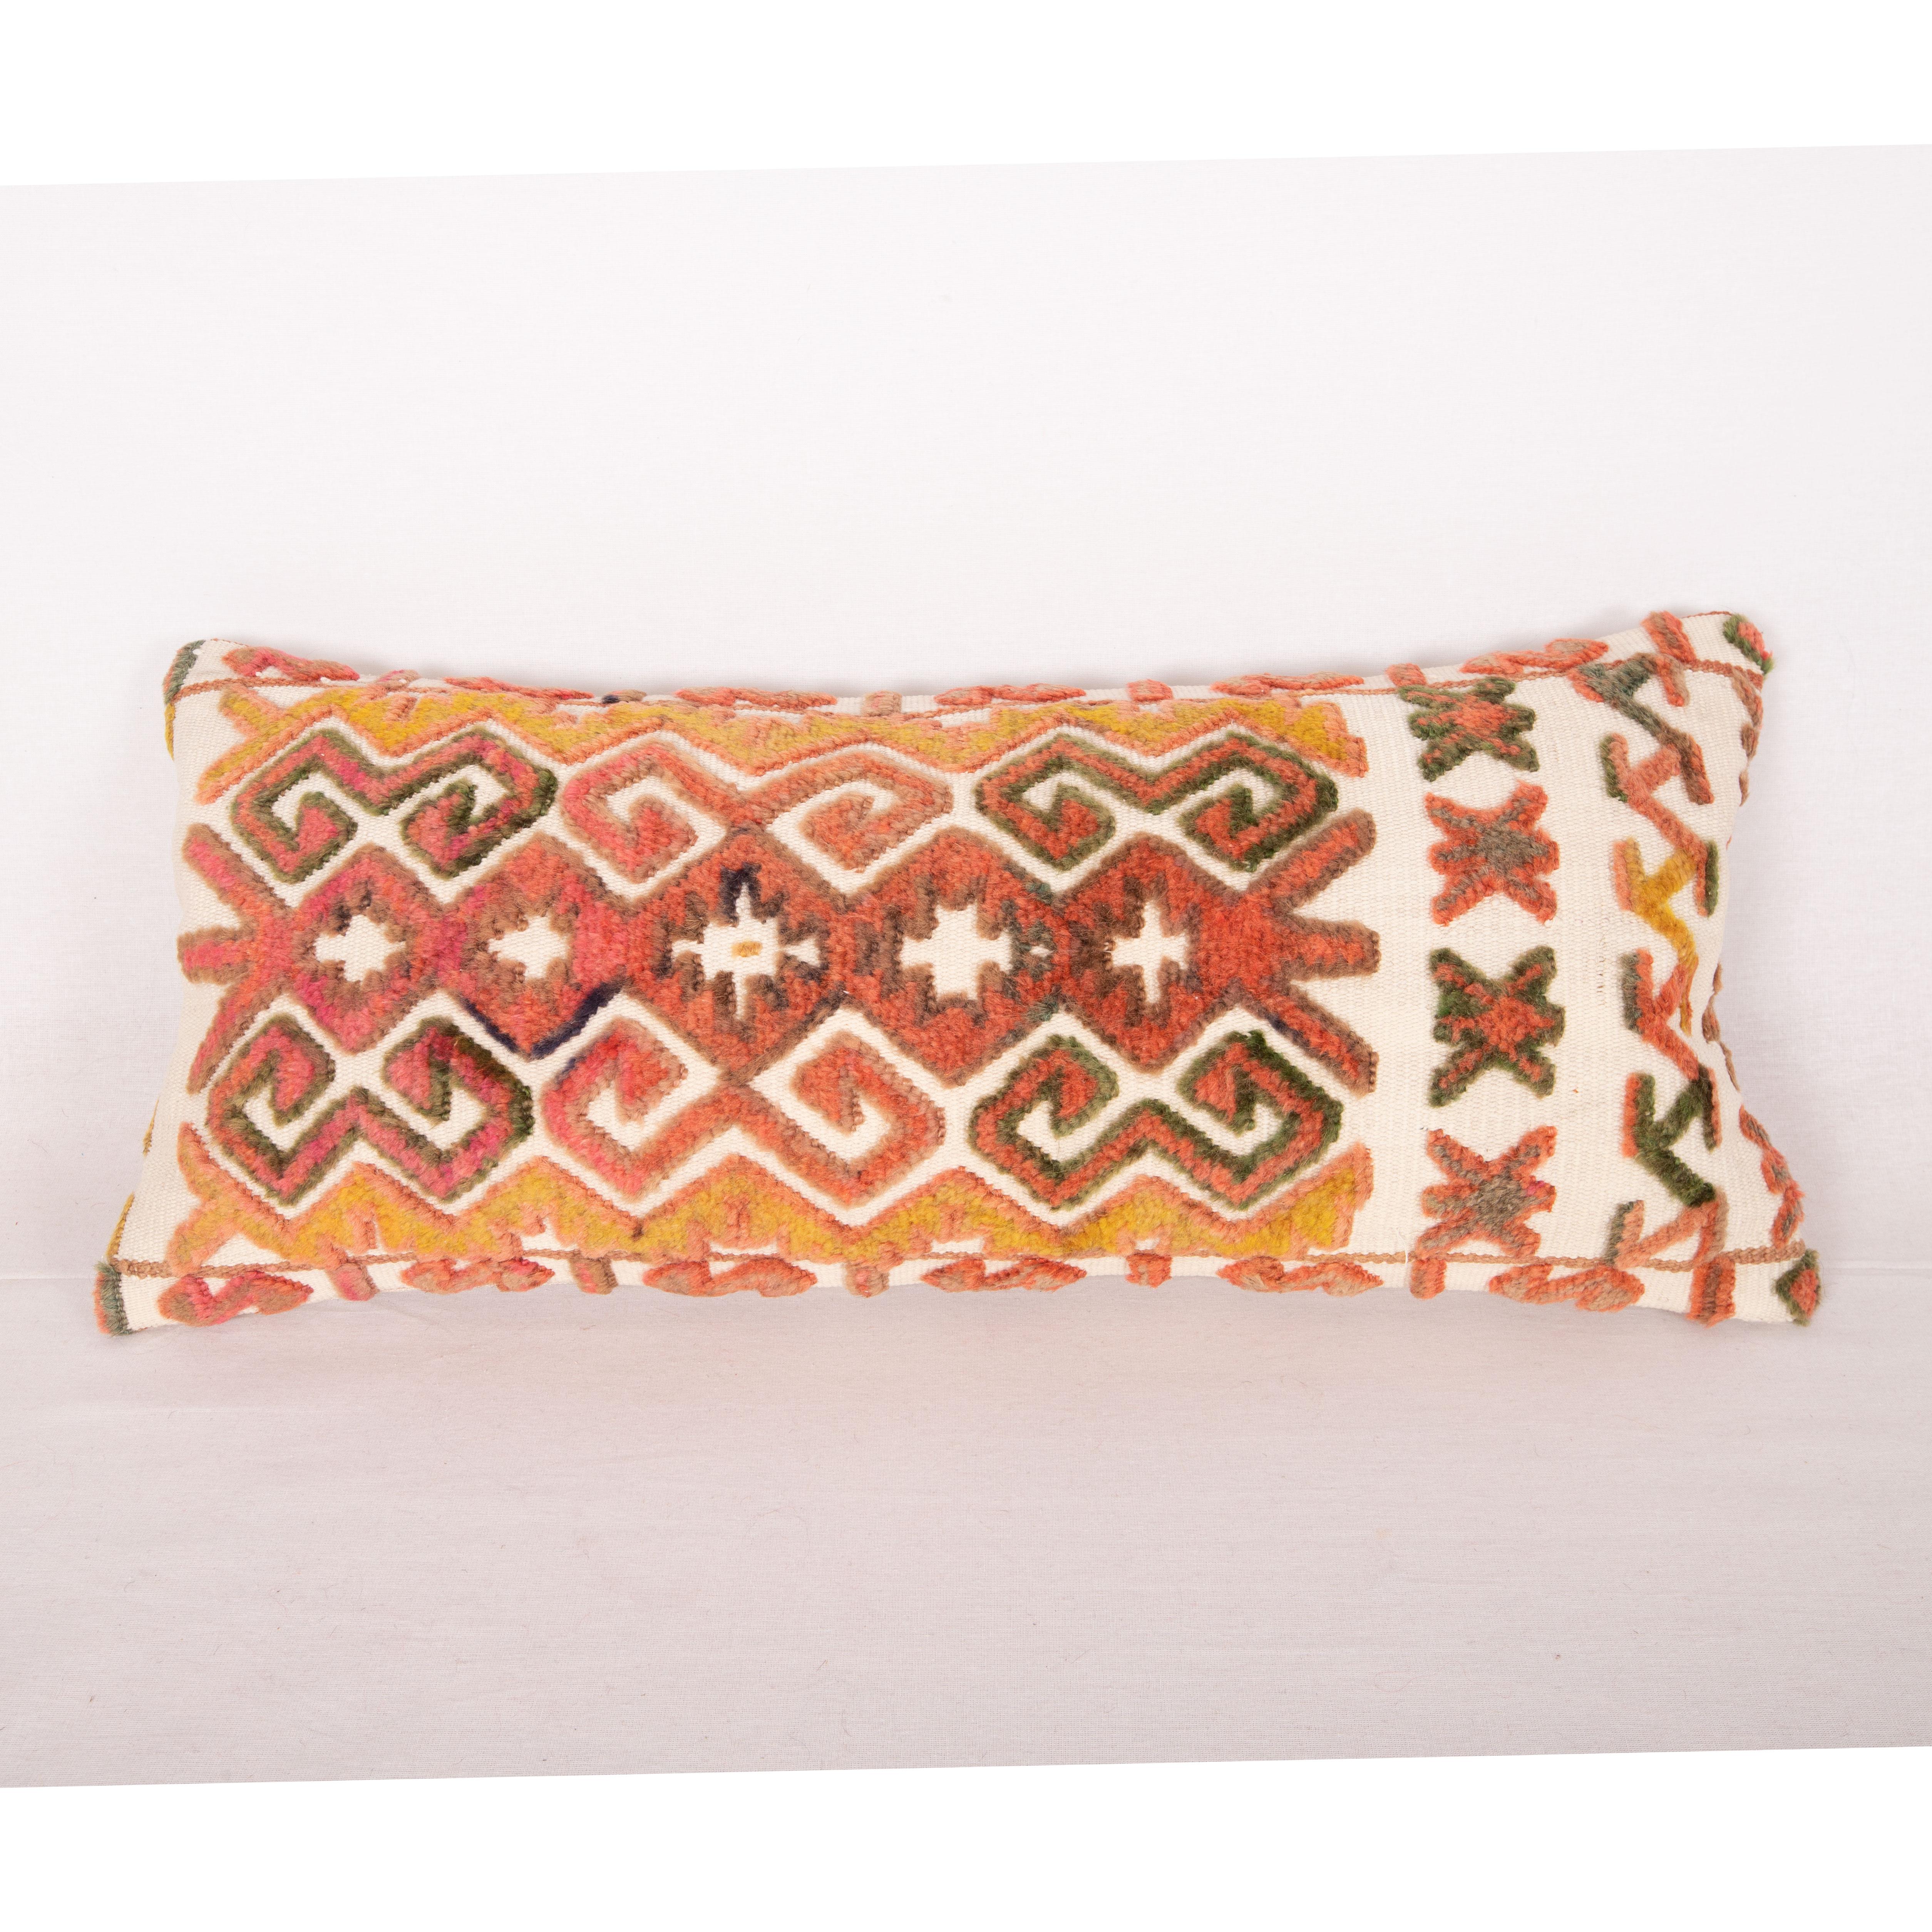 Tent bands are done almost by all the tribes of Turkmen peoples of Central Asia. They functioned as decorative hangings around their dwelling called Yurt. This very pillow is made from a Karakalpak one. 
It does not come with an insert but a bag